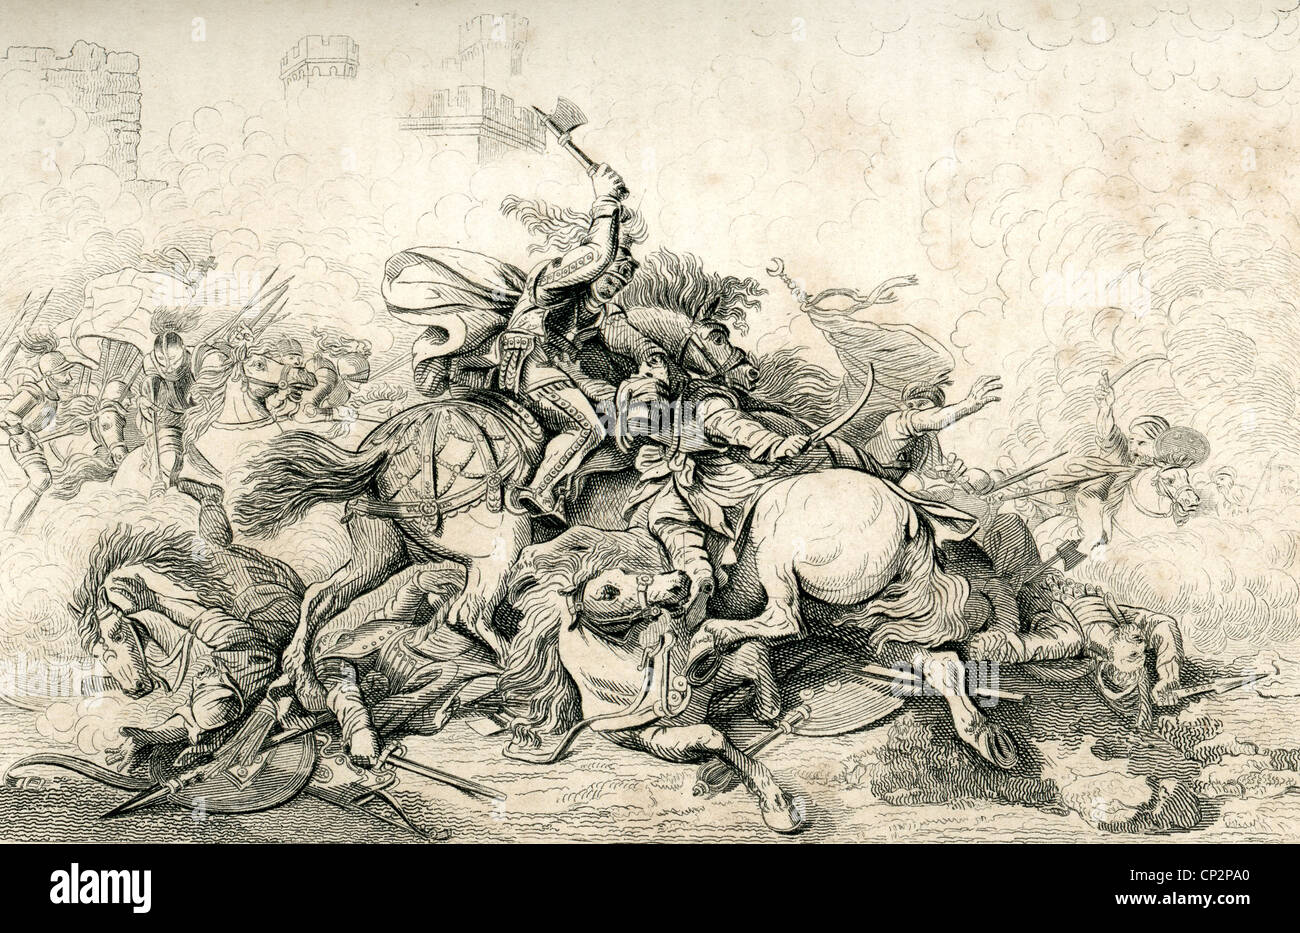 Illustration of King Richard the Lionheart in battle during the Third Crusade Stock Photo